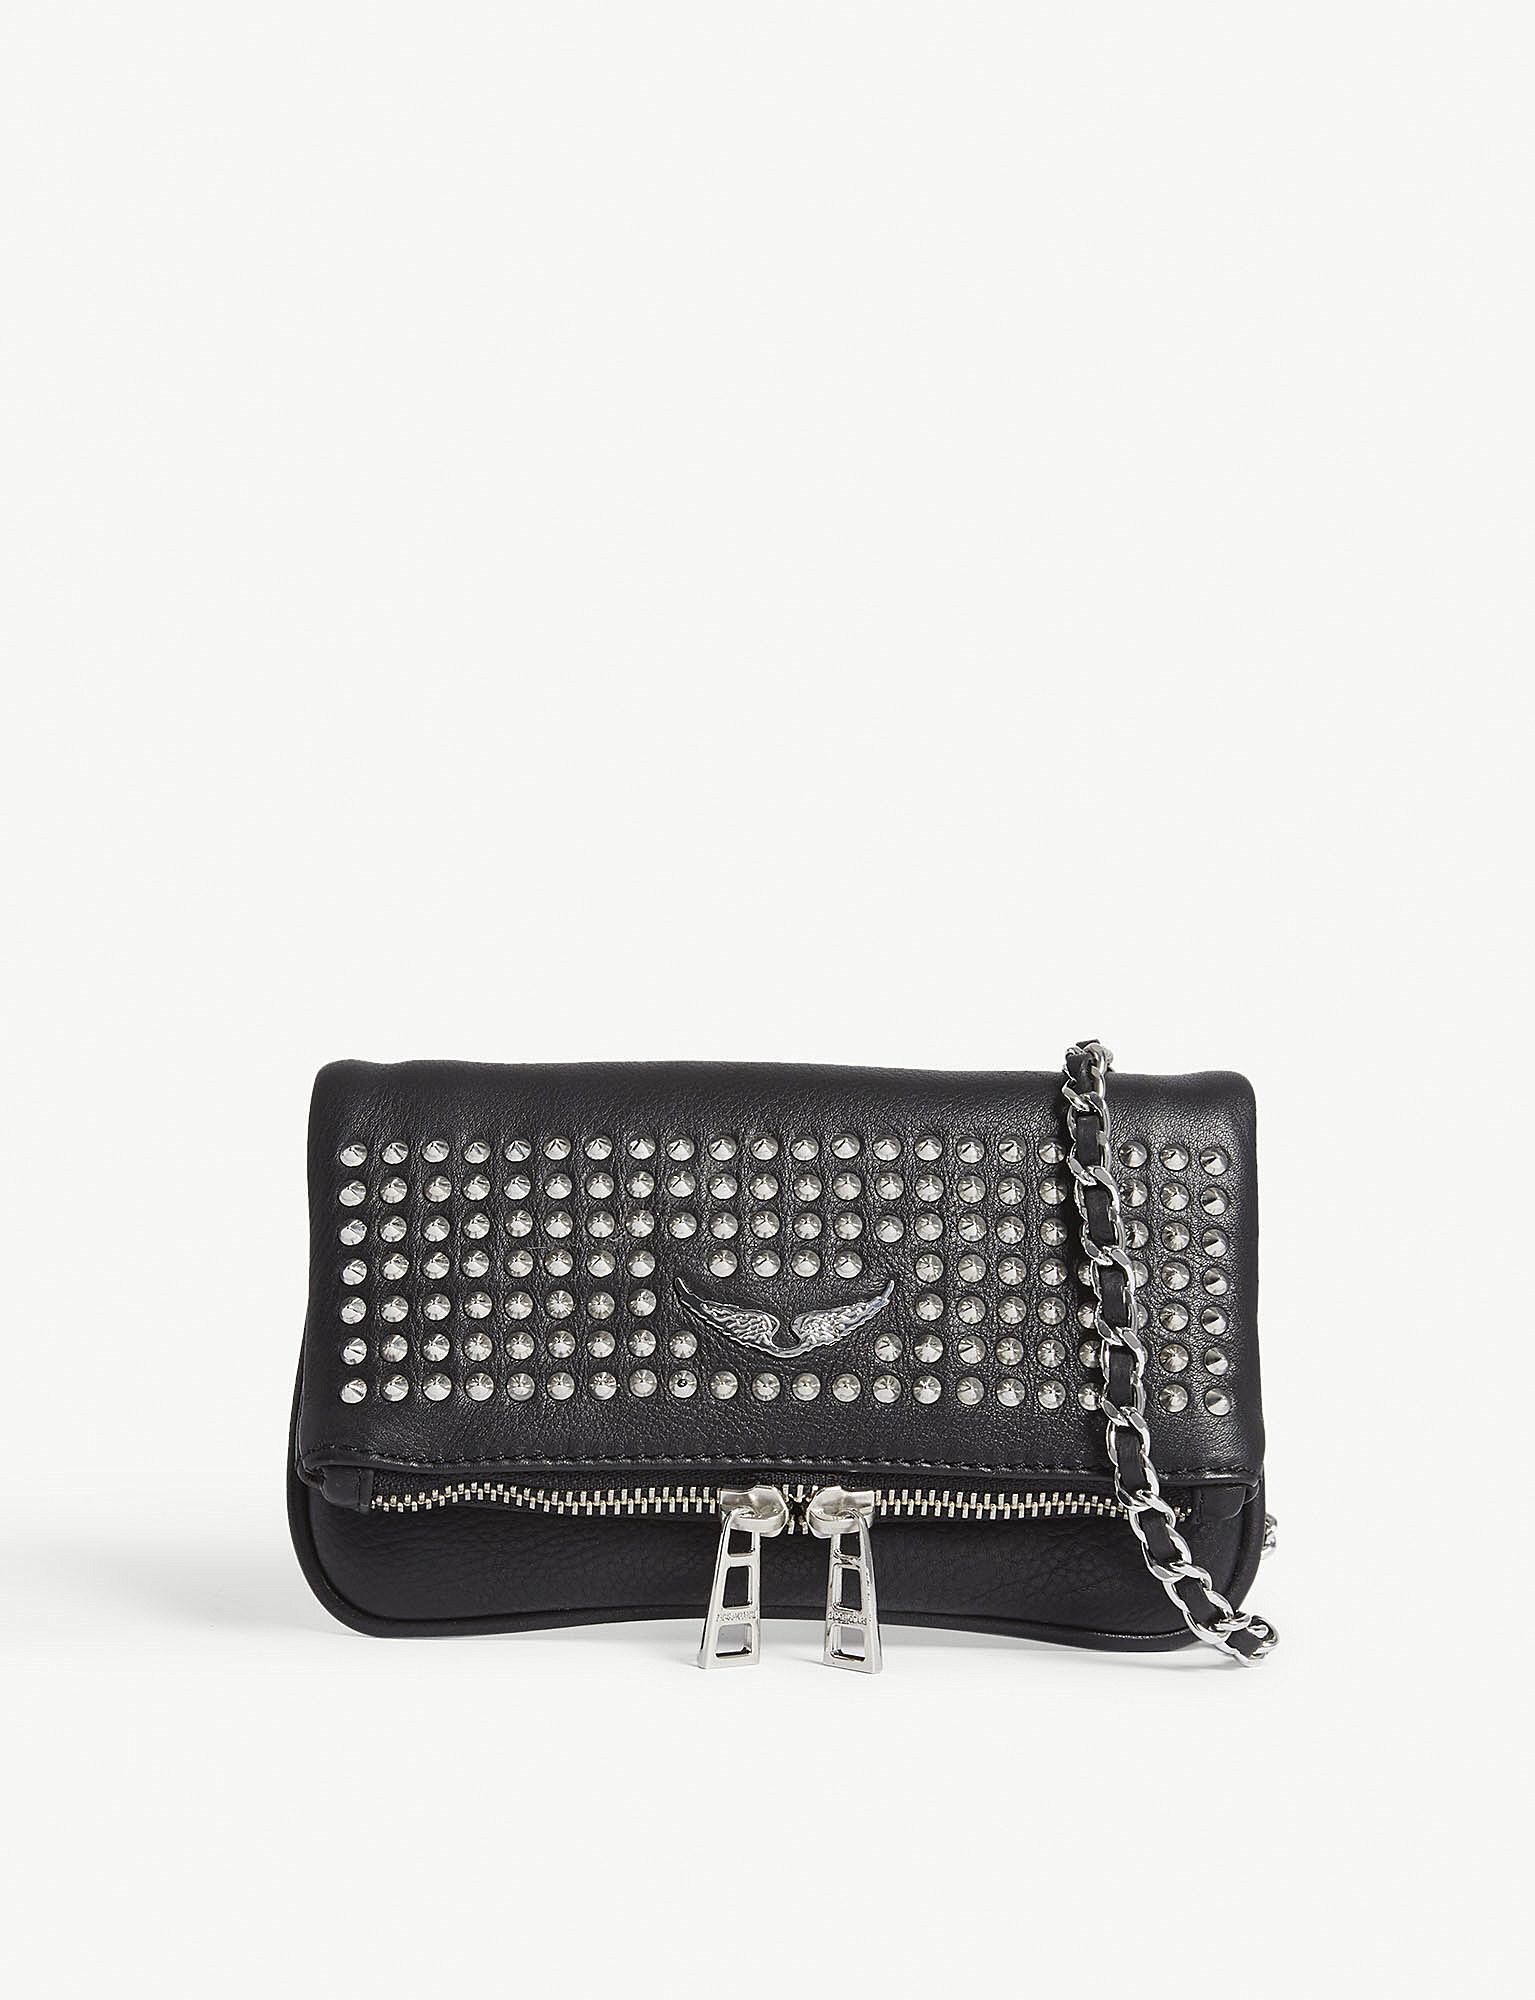 Zadig & Voltaire Rock Nano Spike Leather Cross-body Bag in Black - Lyst